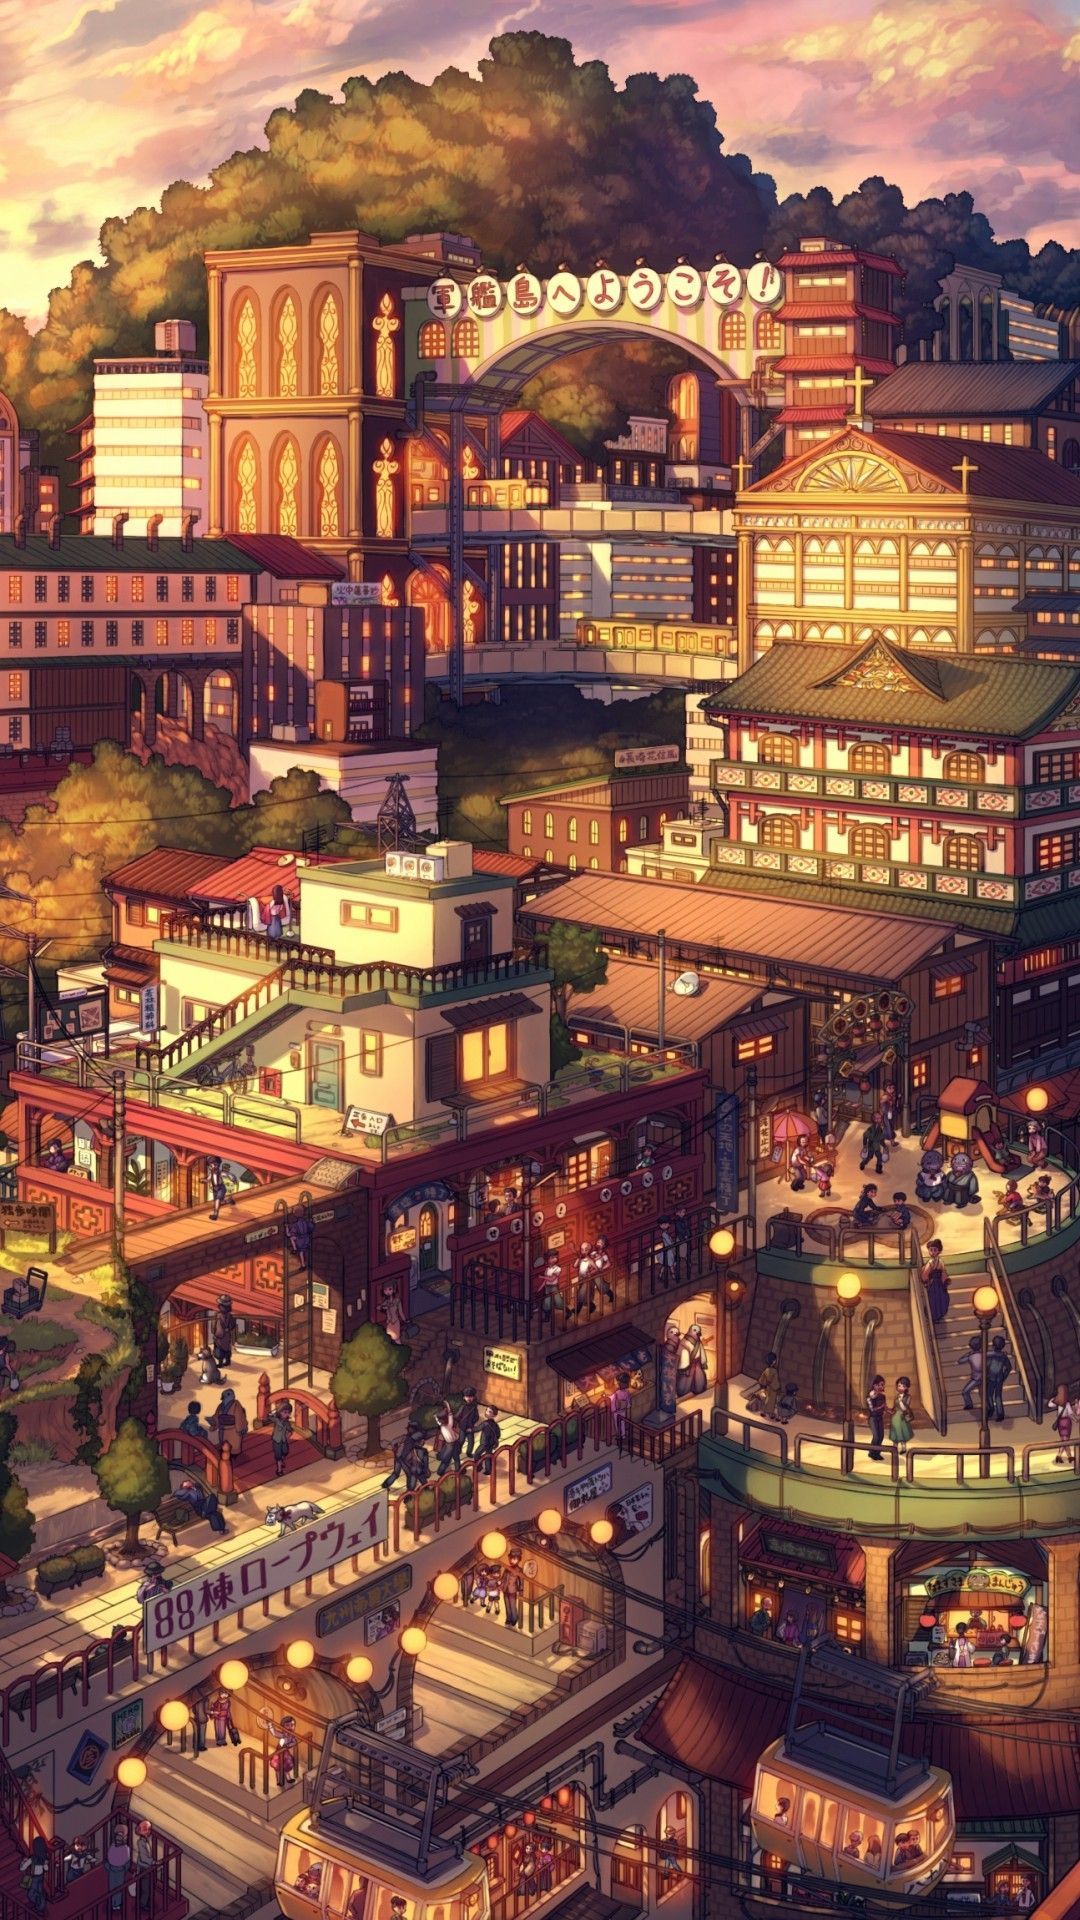 IPhone wallpaper of a colorful anime city with tall buildings and people walking around - Japanese